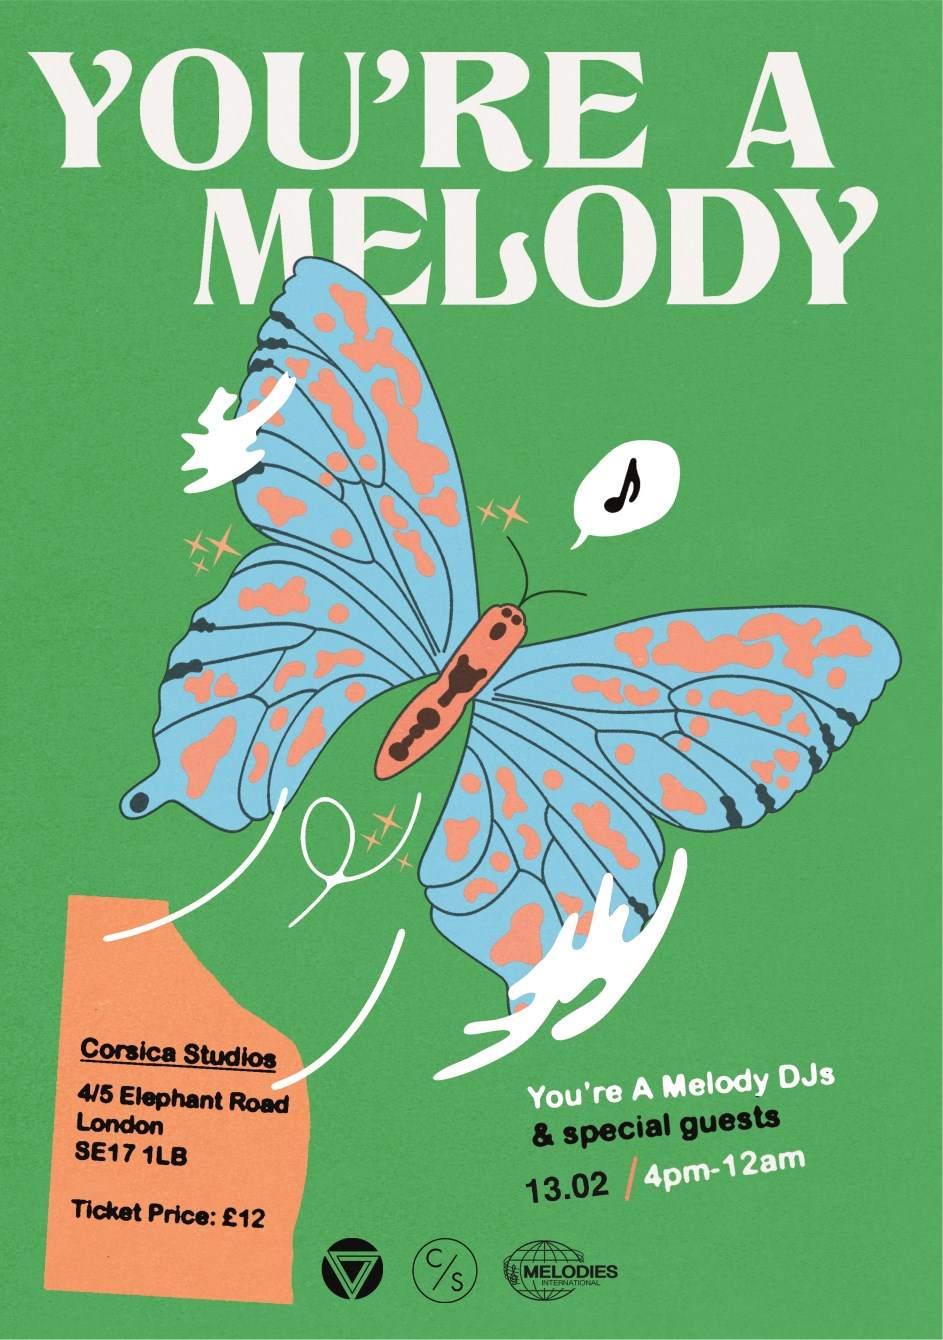 You're a Melody - Flyer front